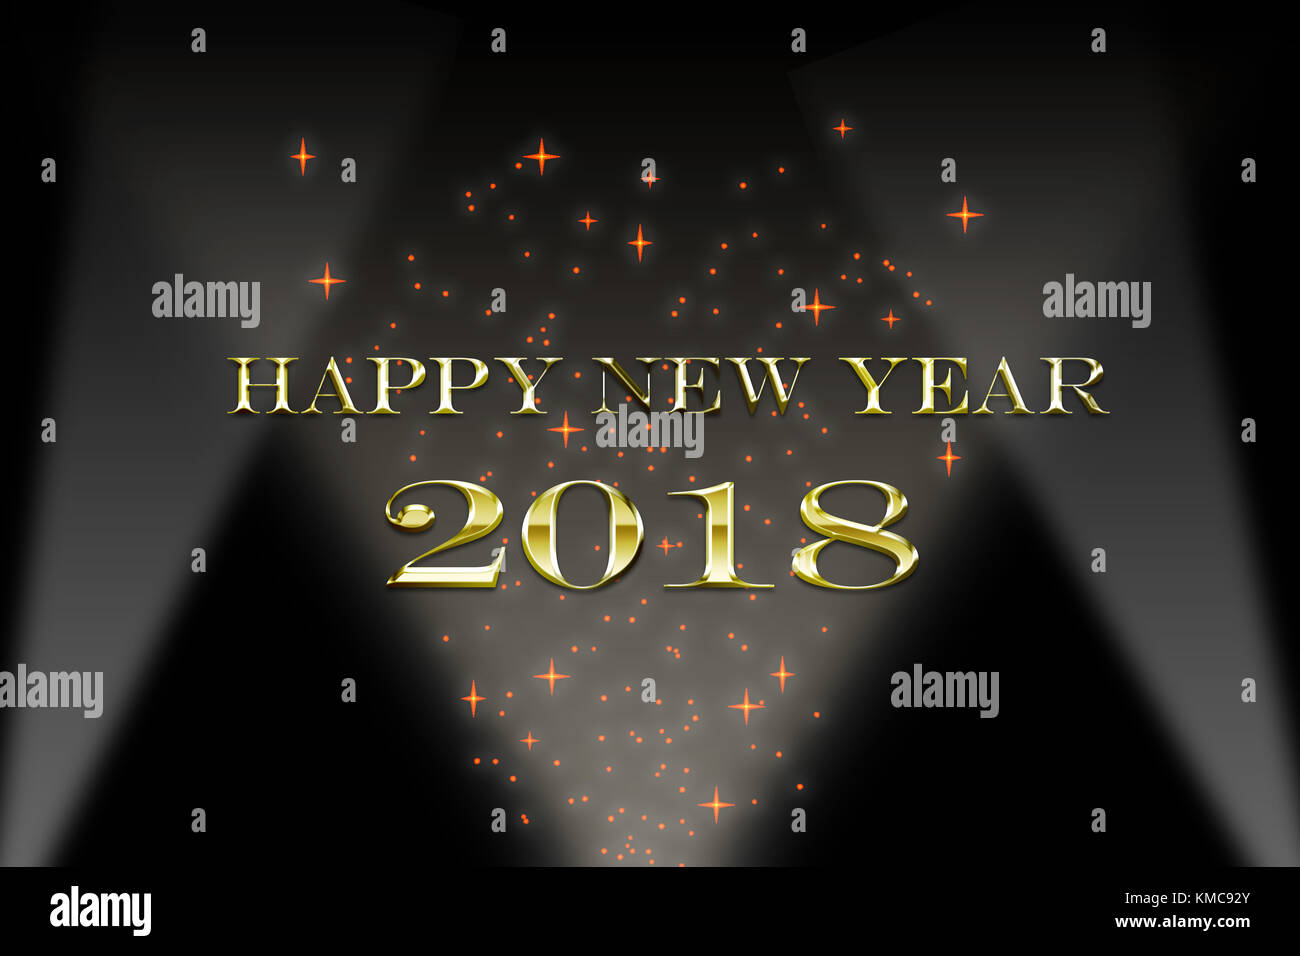 illustration of the new year 2018 on a black and gold background with stars Stock Photo